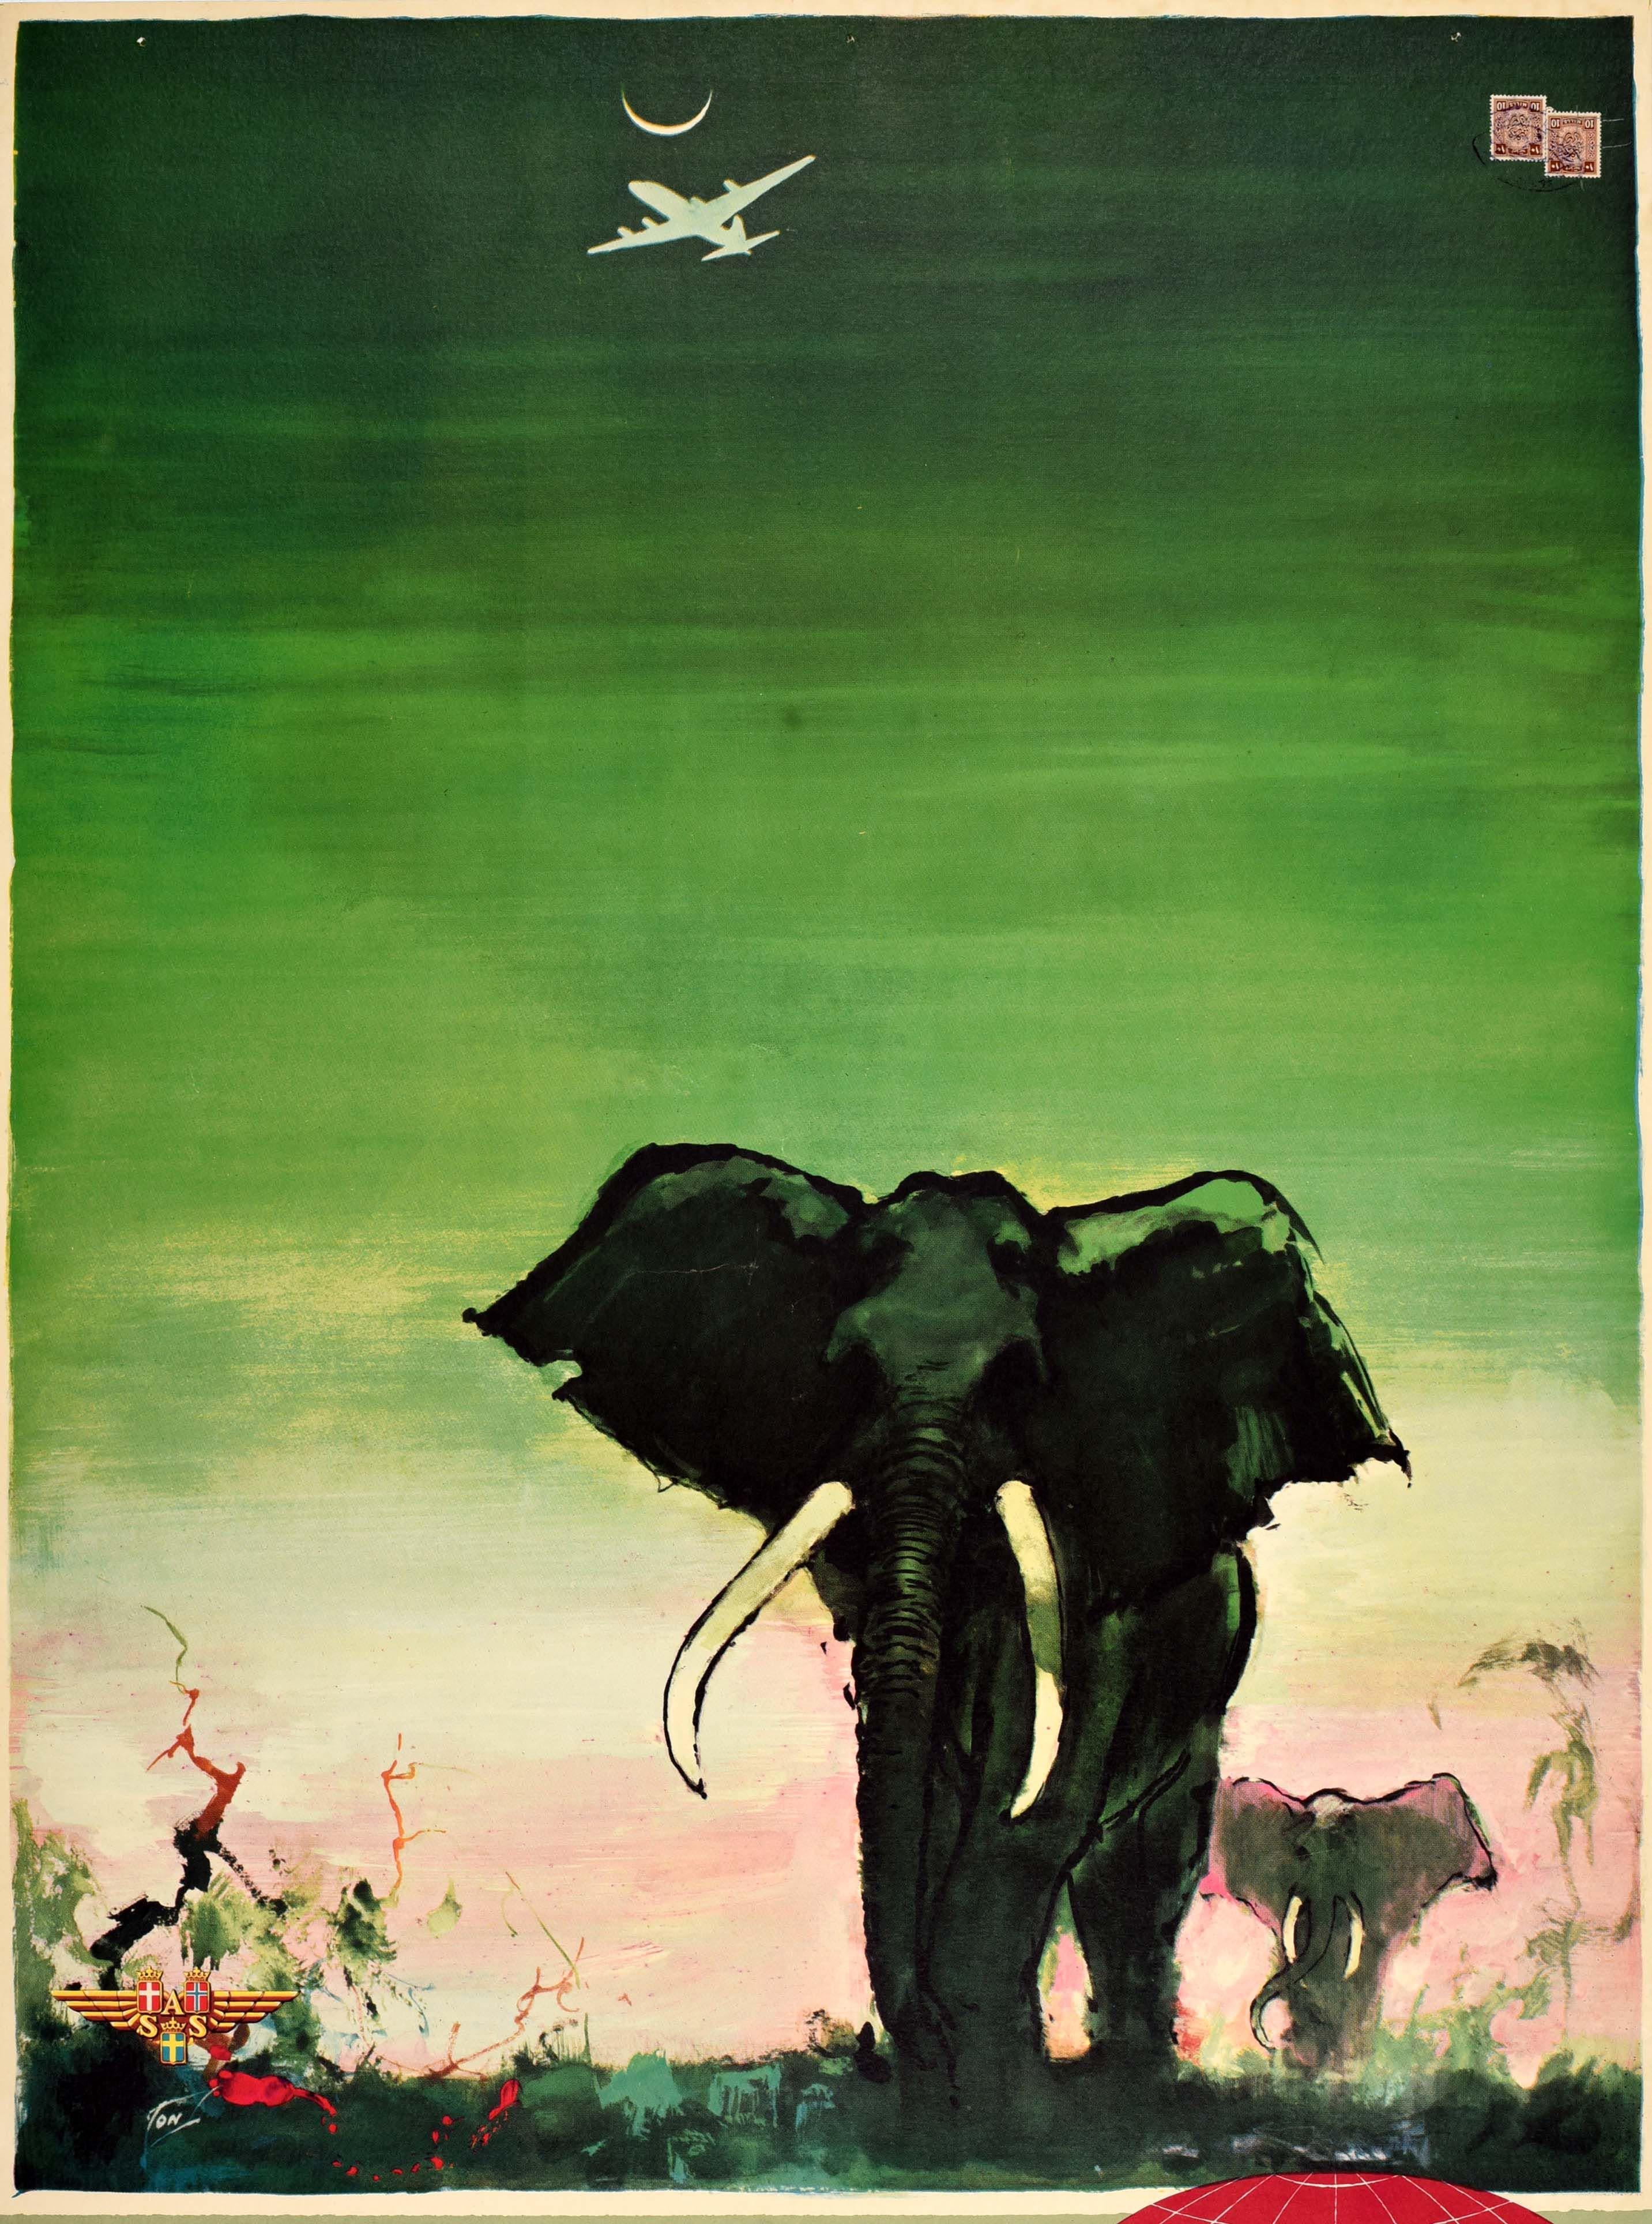 Original Vintage Travel Poster Africa SAS Airline Otto Nielson Elephants Design - Print by Otto Nielsen